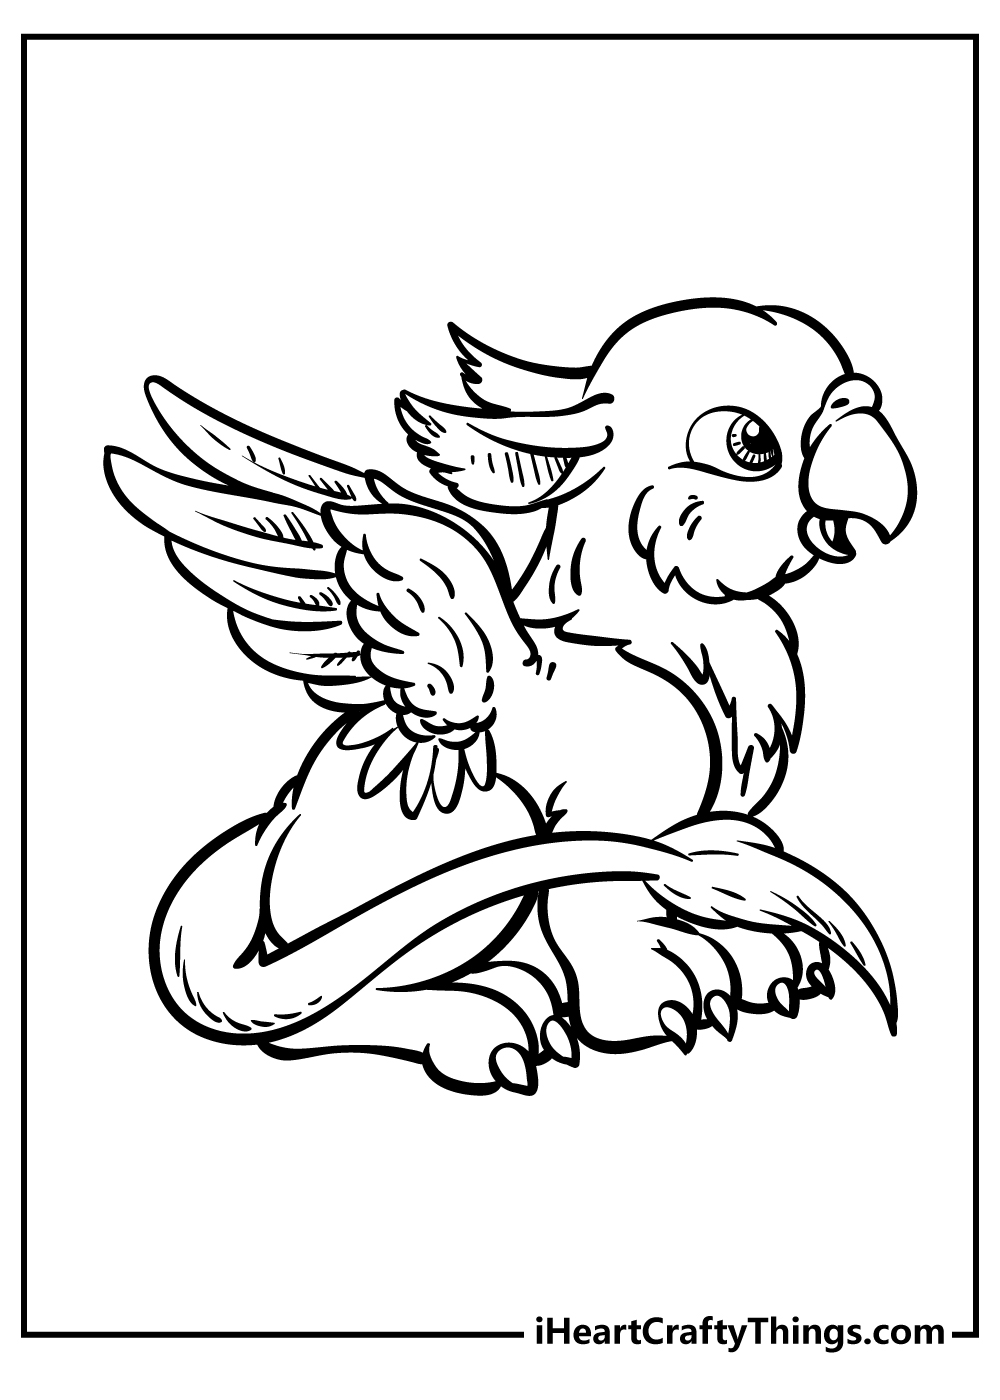 Griffin coloring pages free printables